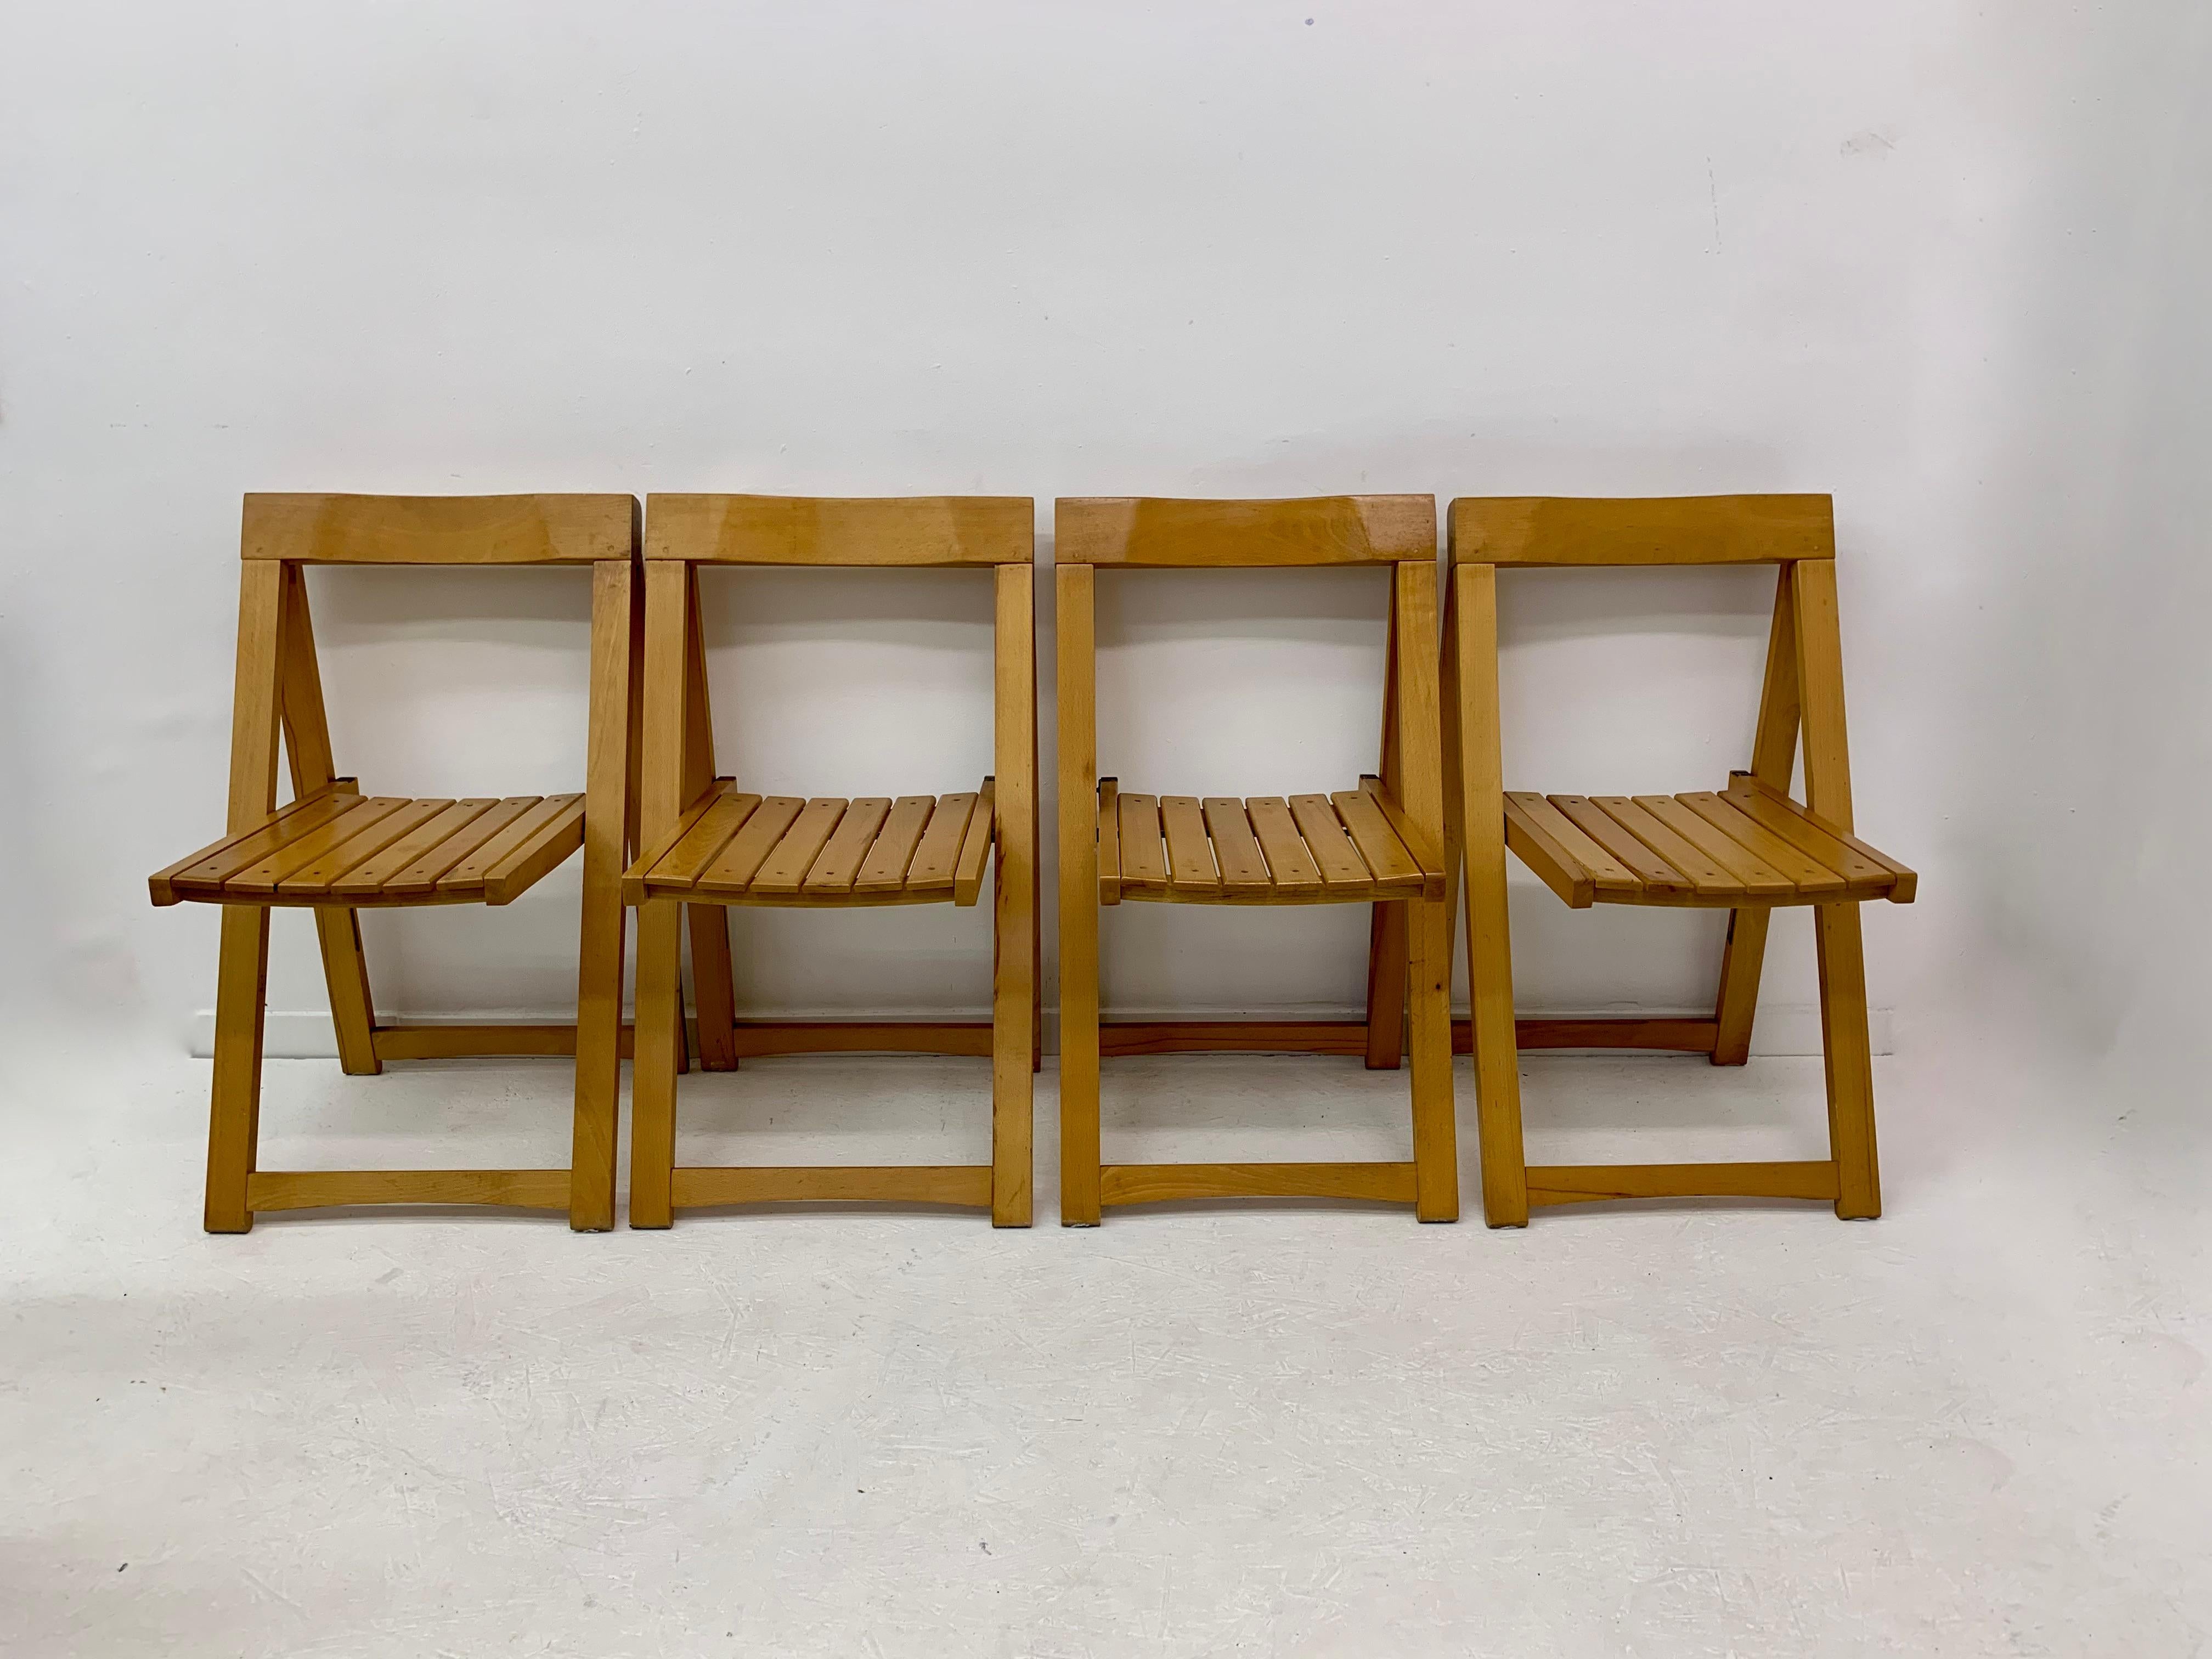 Set of 4 Aldo Jacober for Alberto Bazzani folding chairs, 1960’s For Sale 3